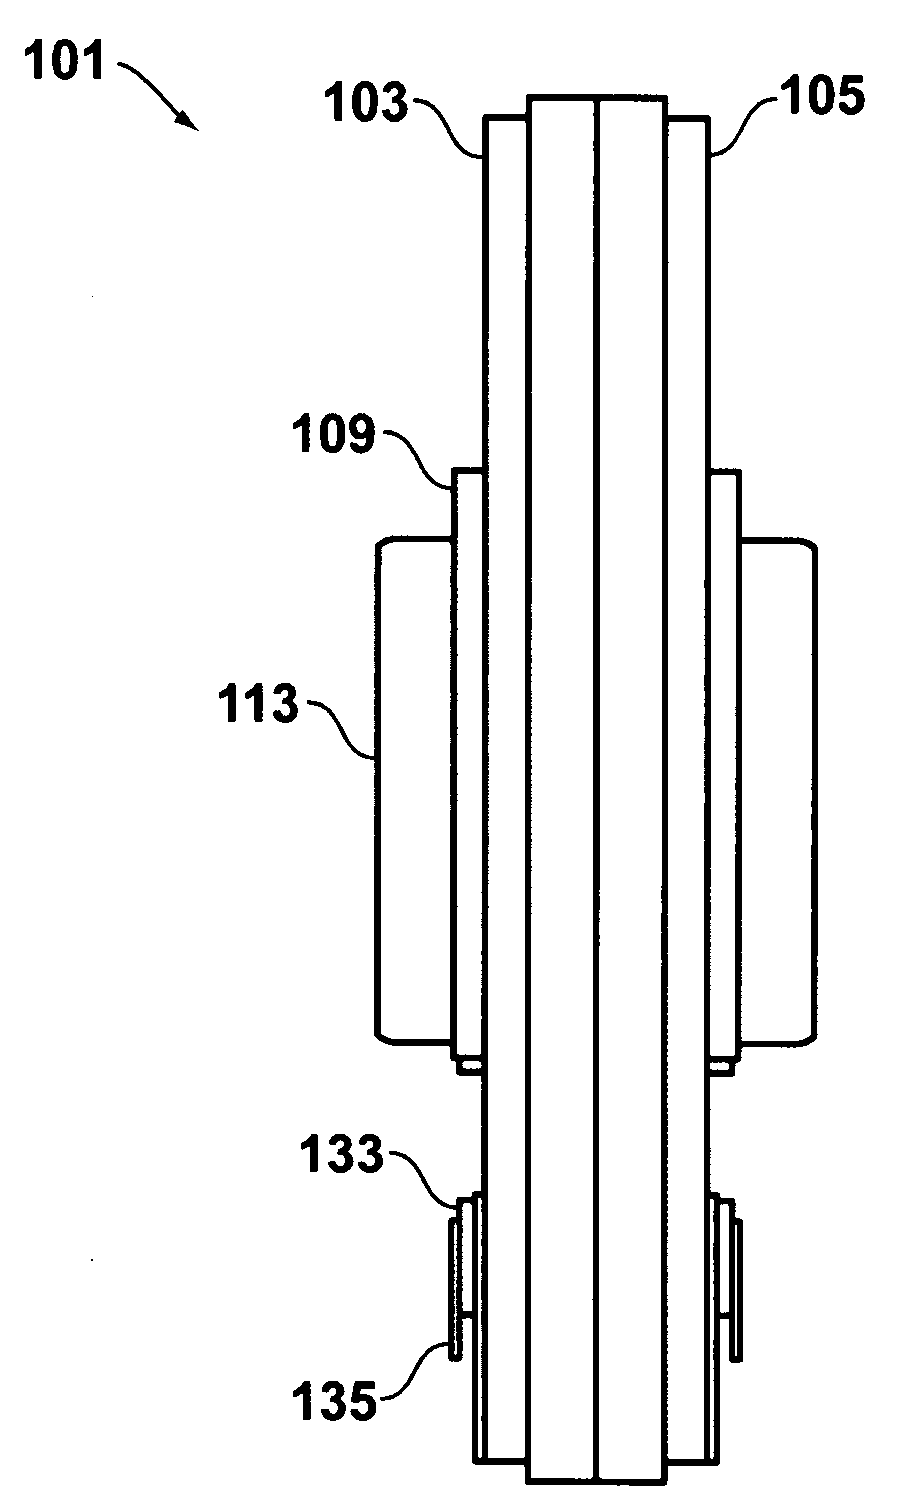 Methods for reducing the non-linear behavior of actuators used for synthetic jets